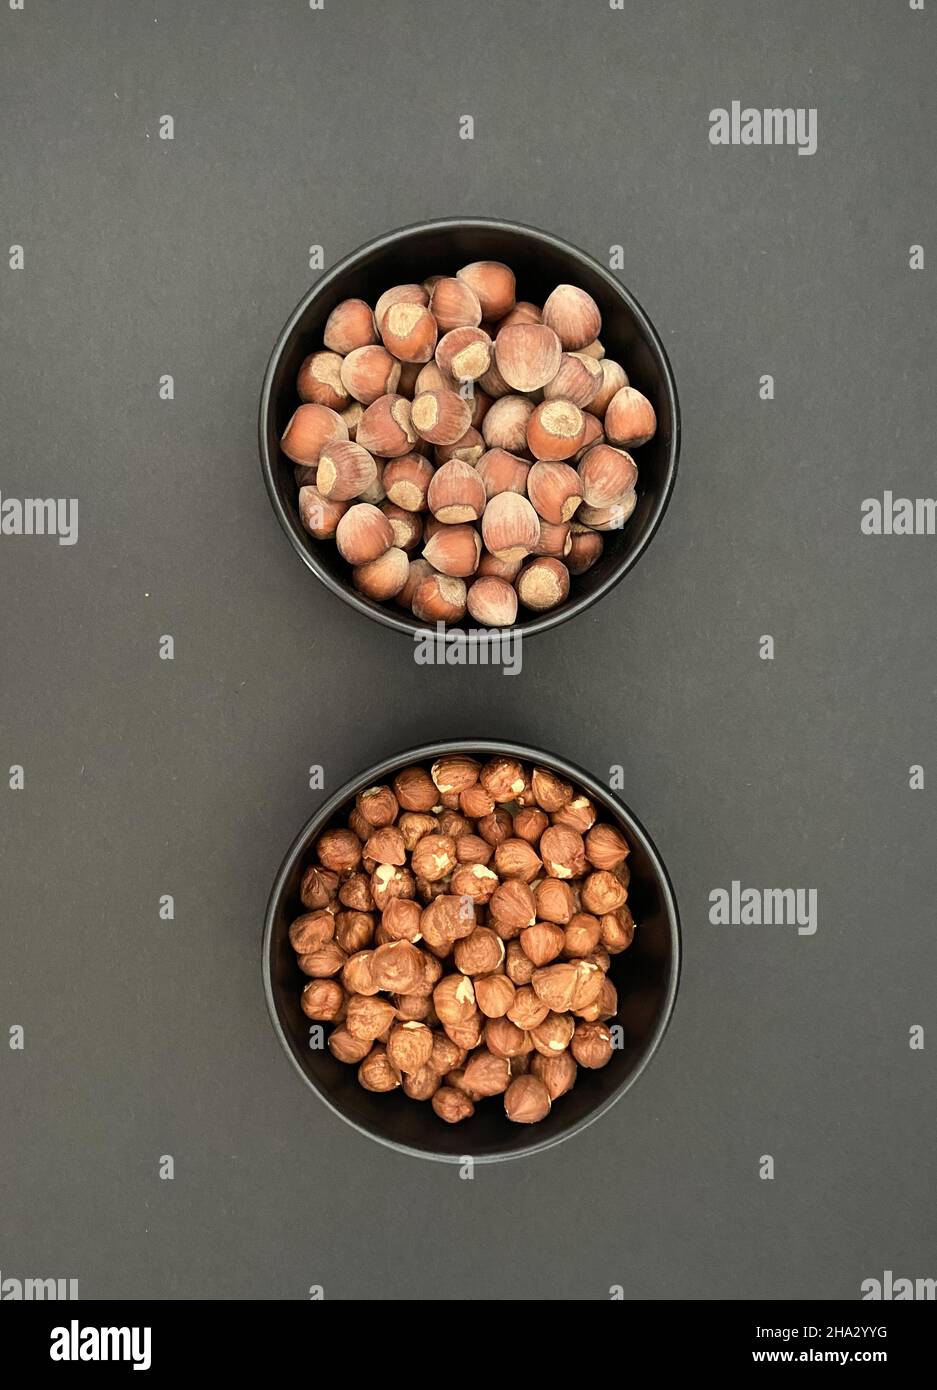 Nuts, hazelnuts in abowl with black background. Food concept and idea. Stock Photo